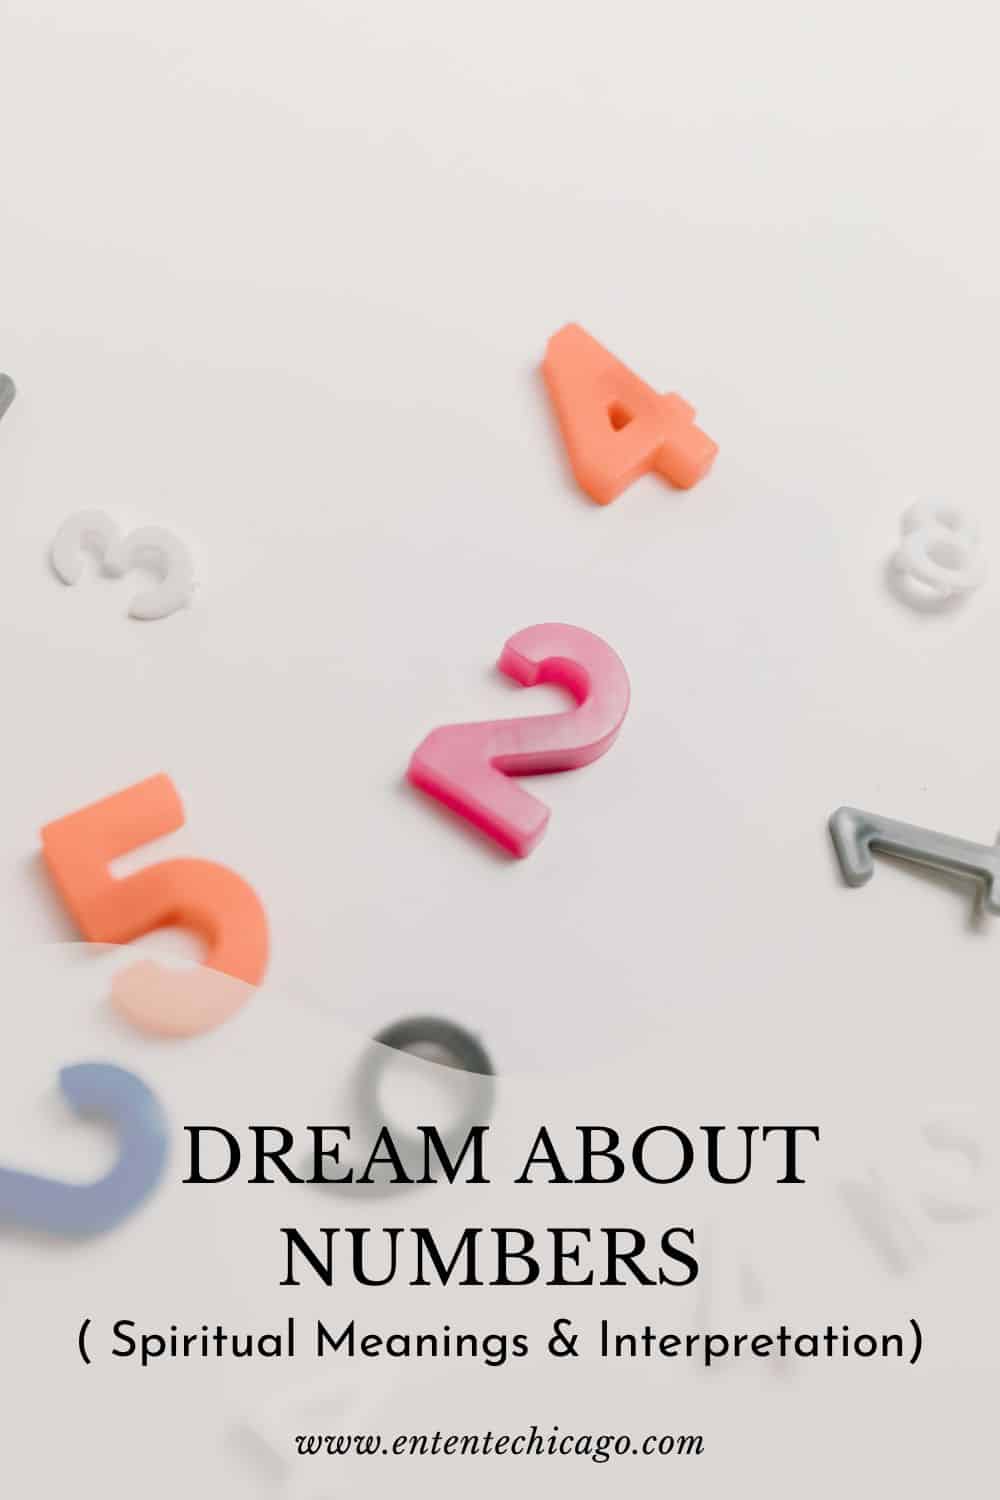 Dream About Numbers ( Spiritual Meanings & Interpretation)